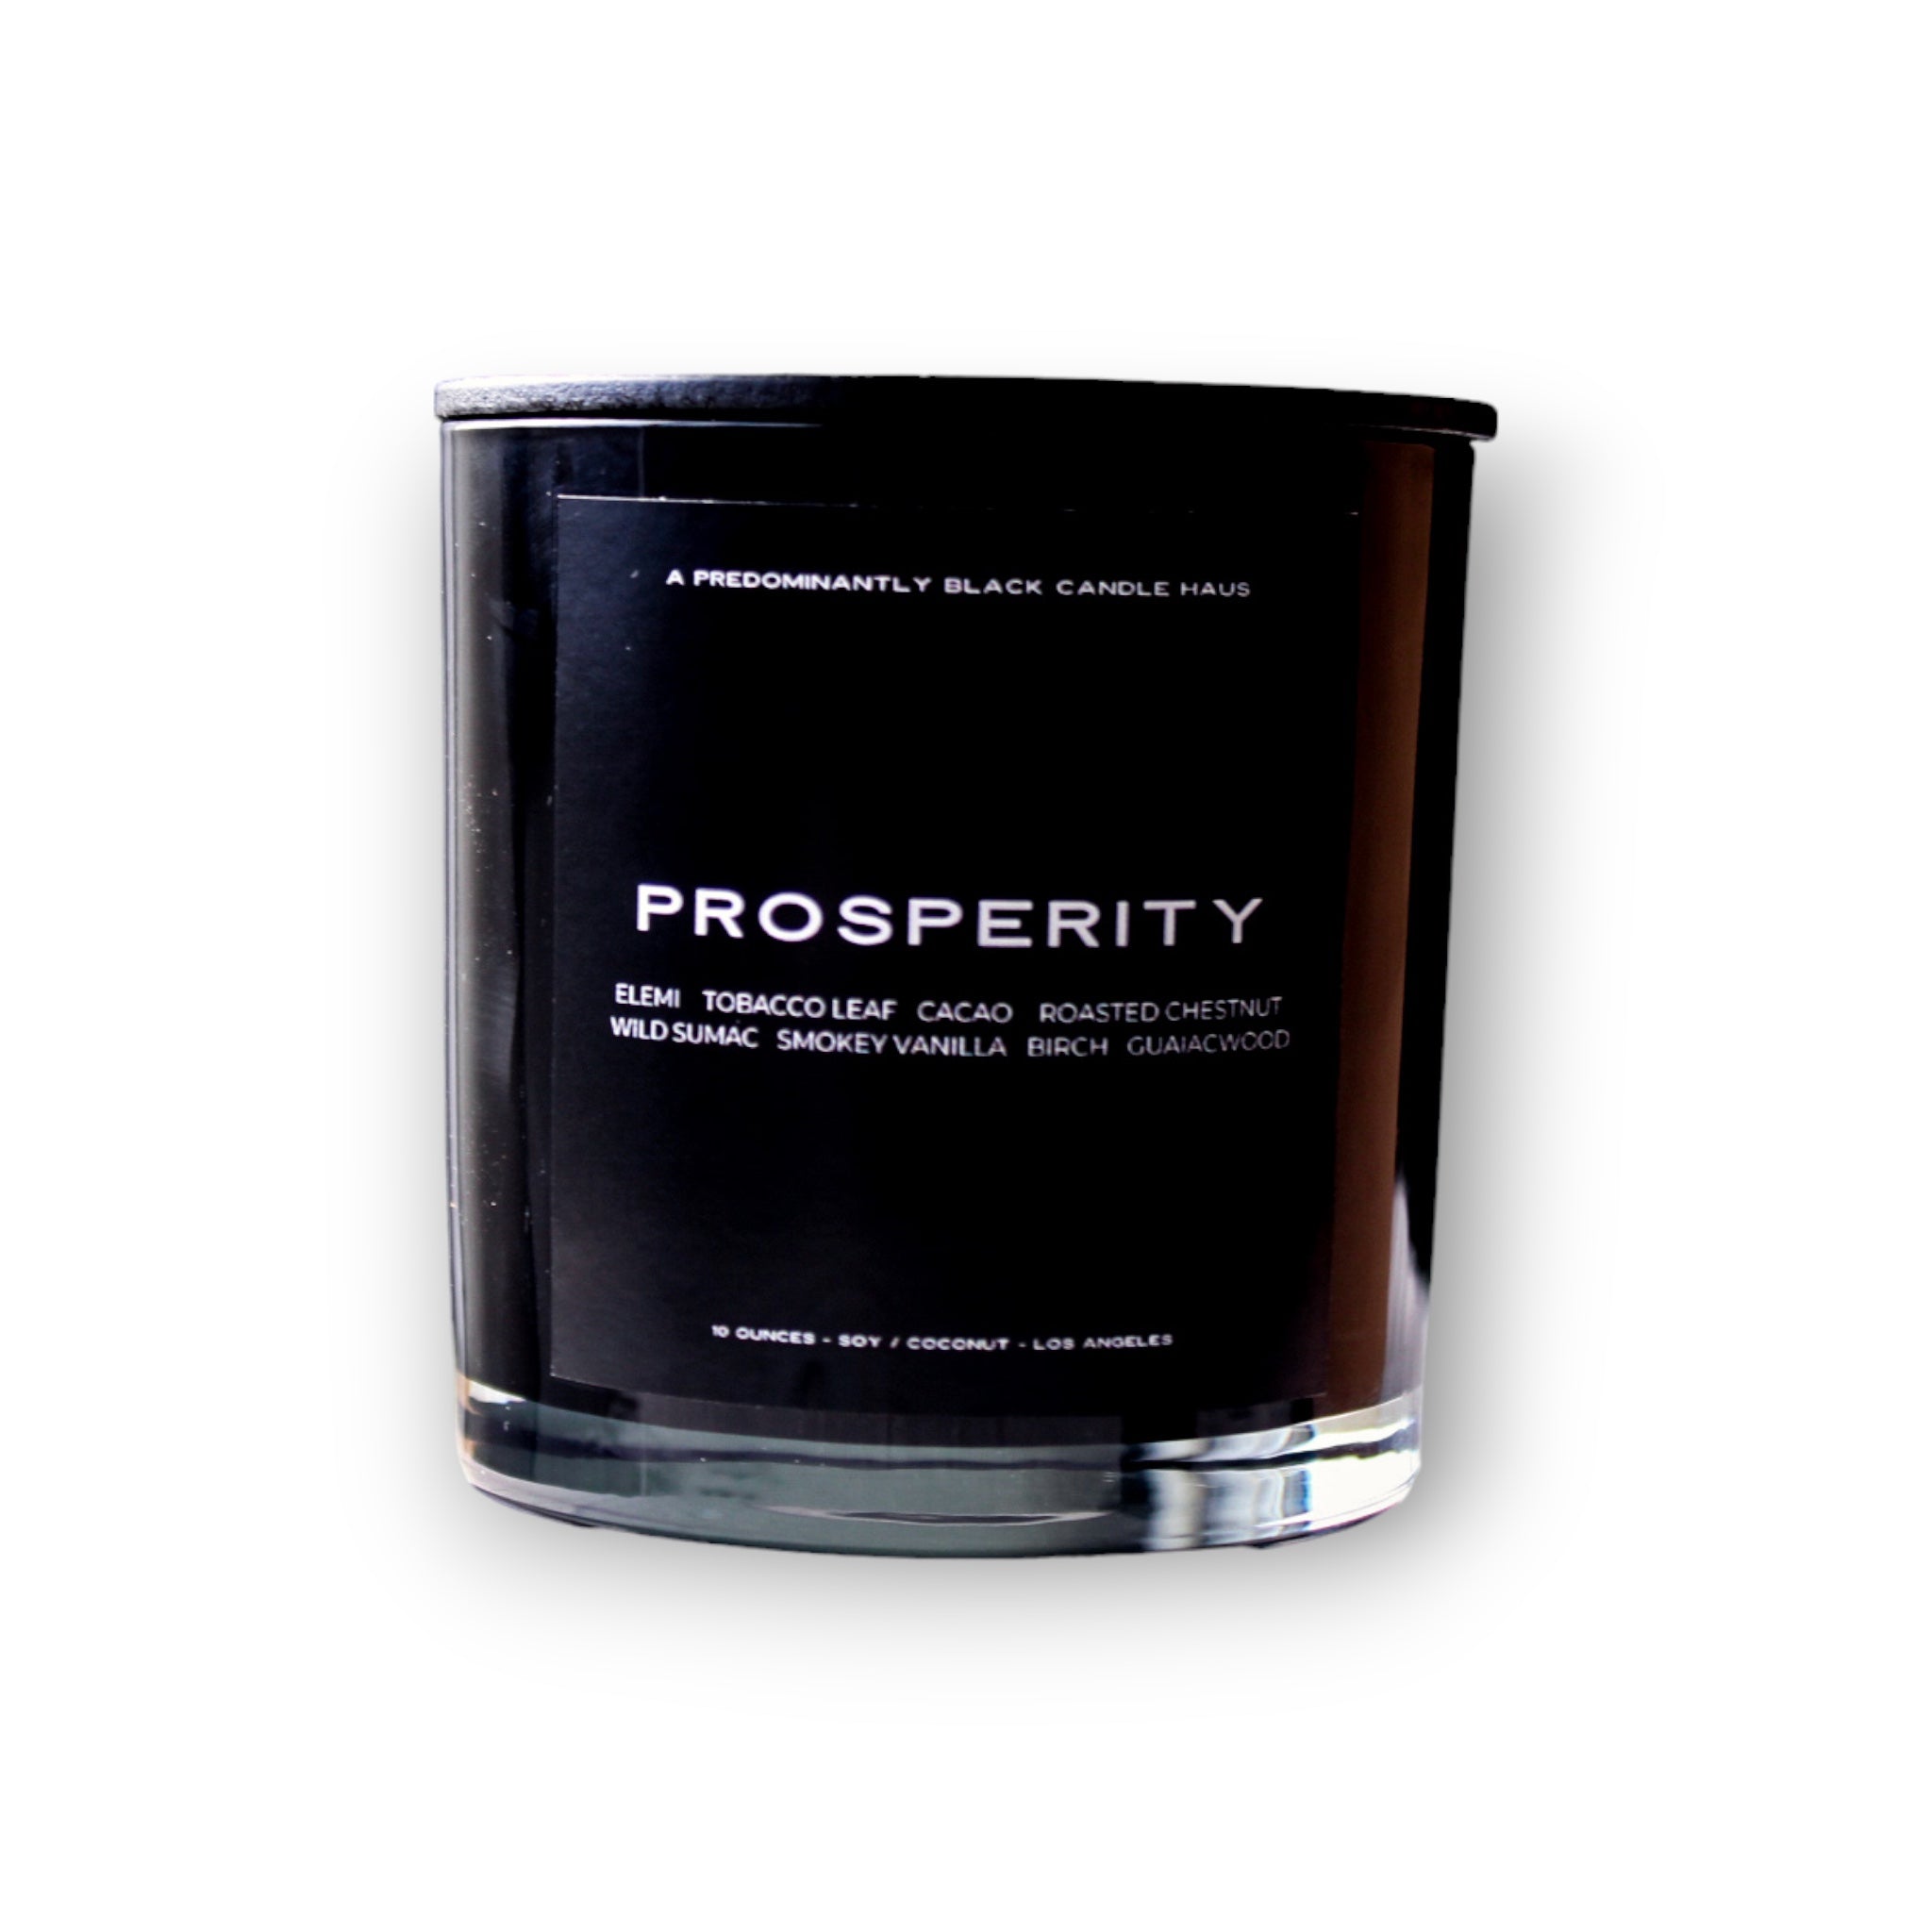 A Predominantly Black candle labeled "PROSPERITY" with scent notes, including tobacco leaf, cacao, roasted chestnut, wild sage, smoky vanilla, birch and oud wood.